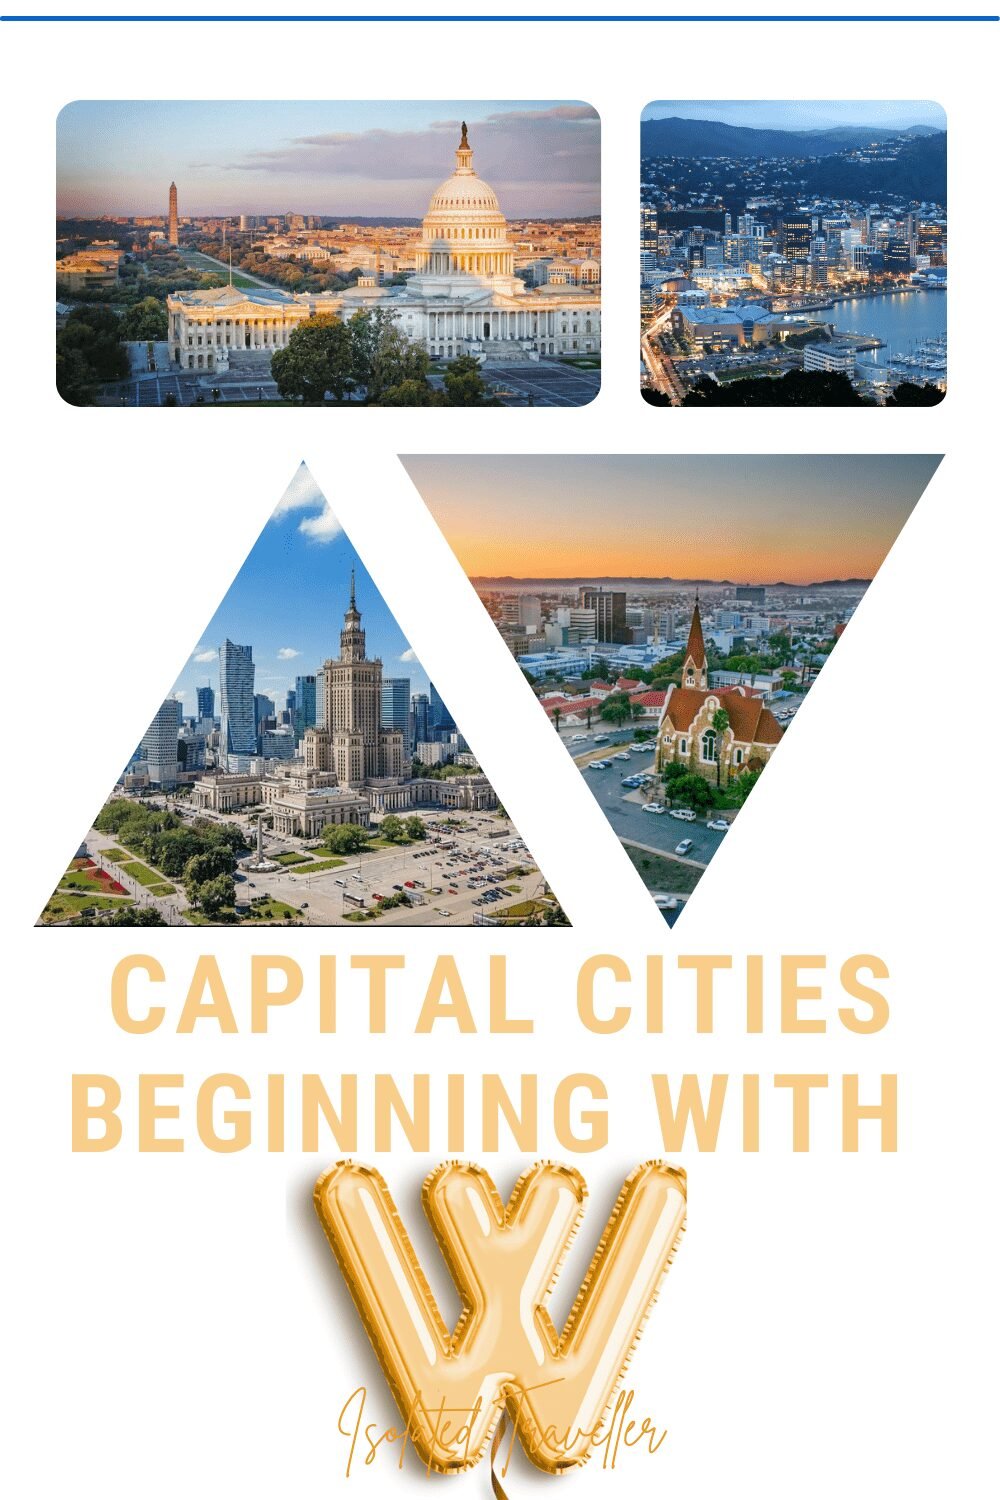 Capital Cities beginning with W